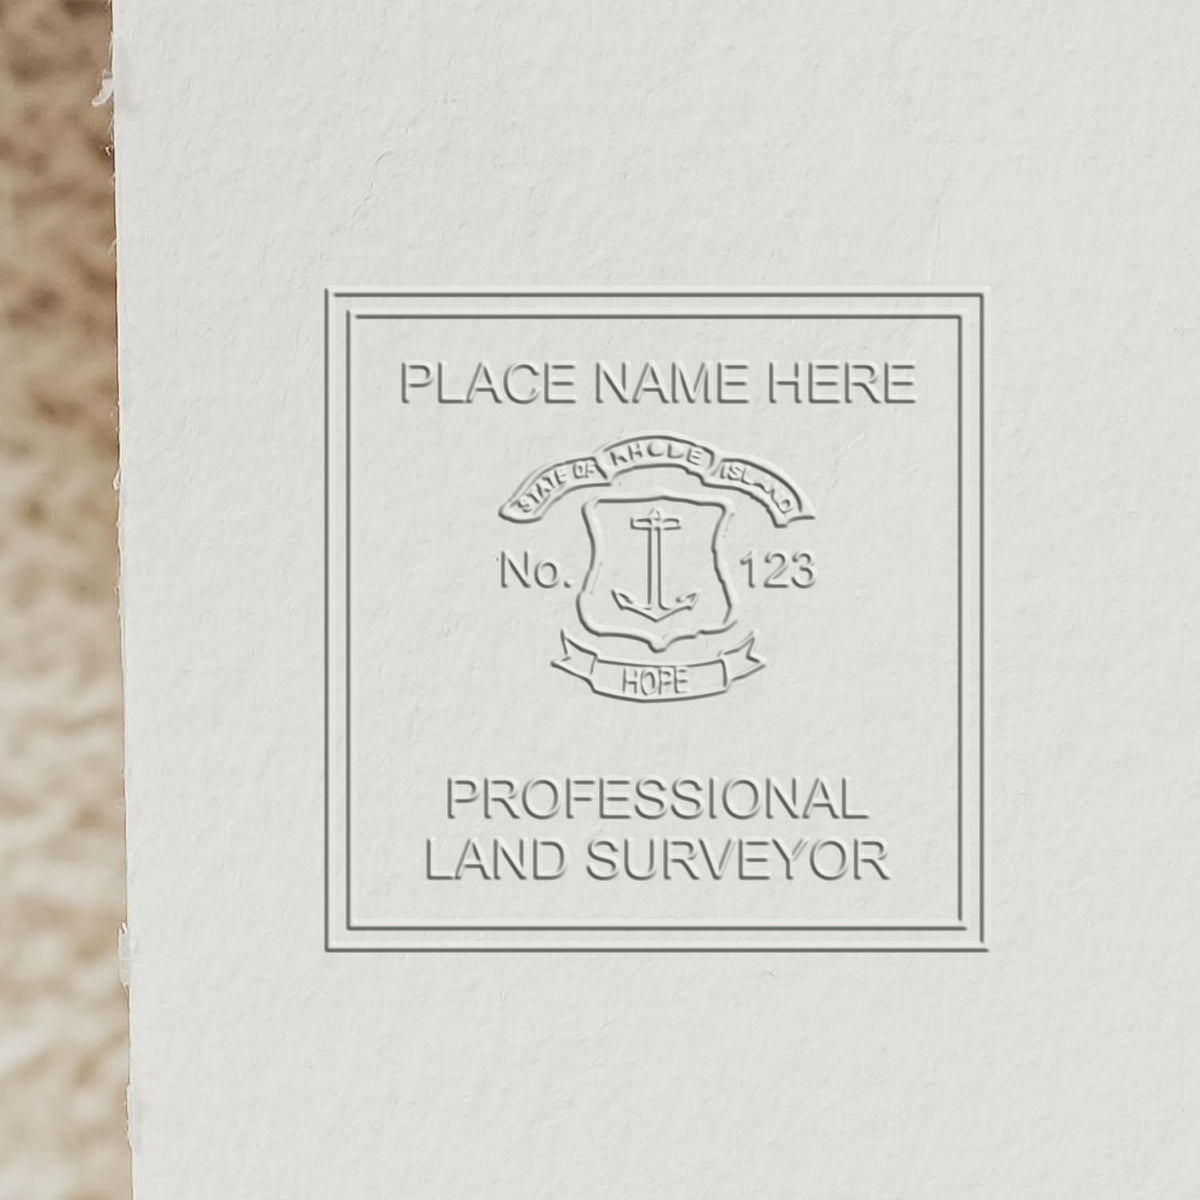 A photograph of the Hybrid Rhode Island Land Surveyor Seal stamp impression reveals a vivid, professional image of the on paper.